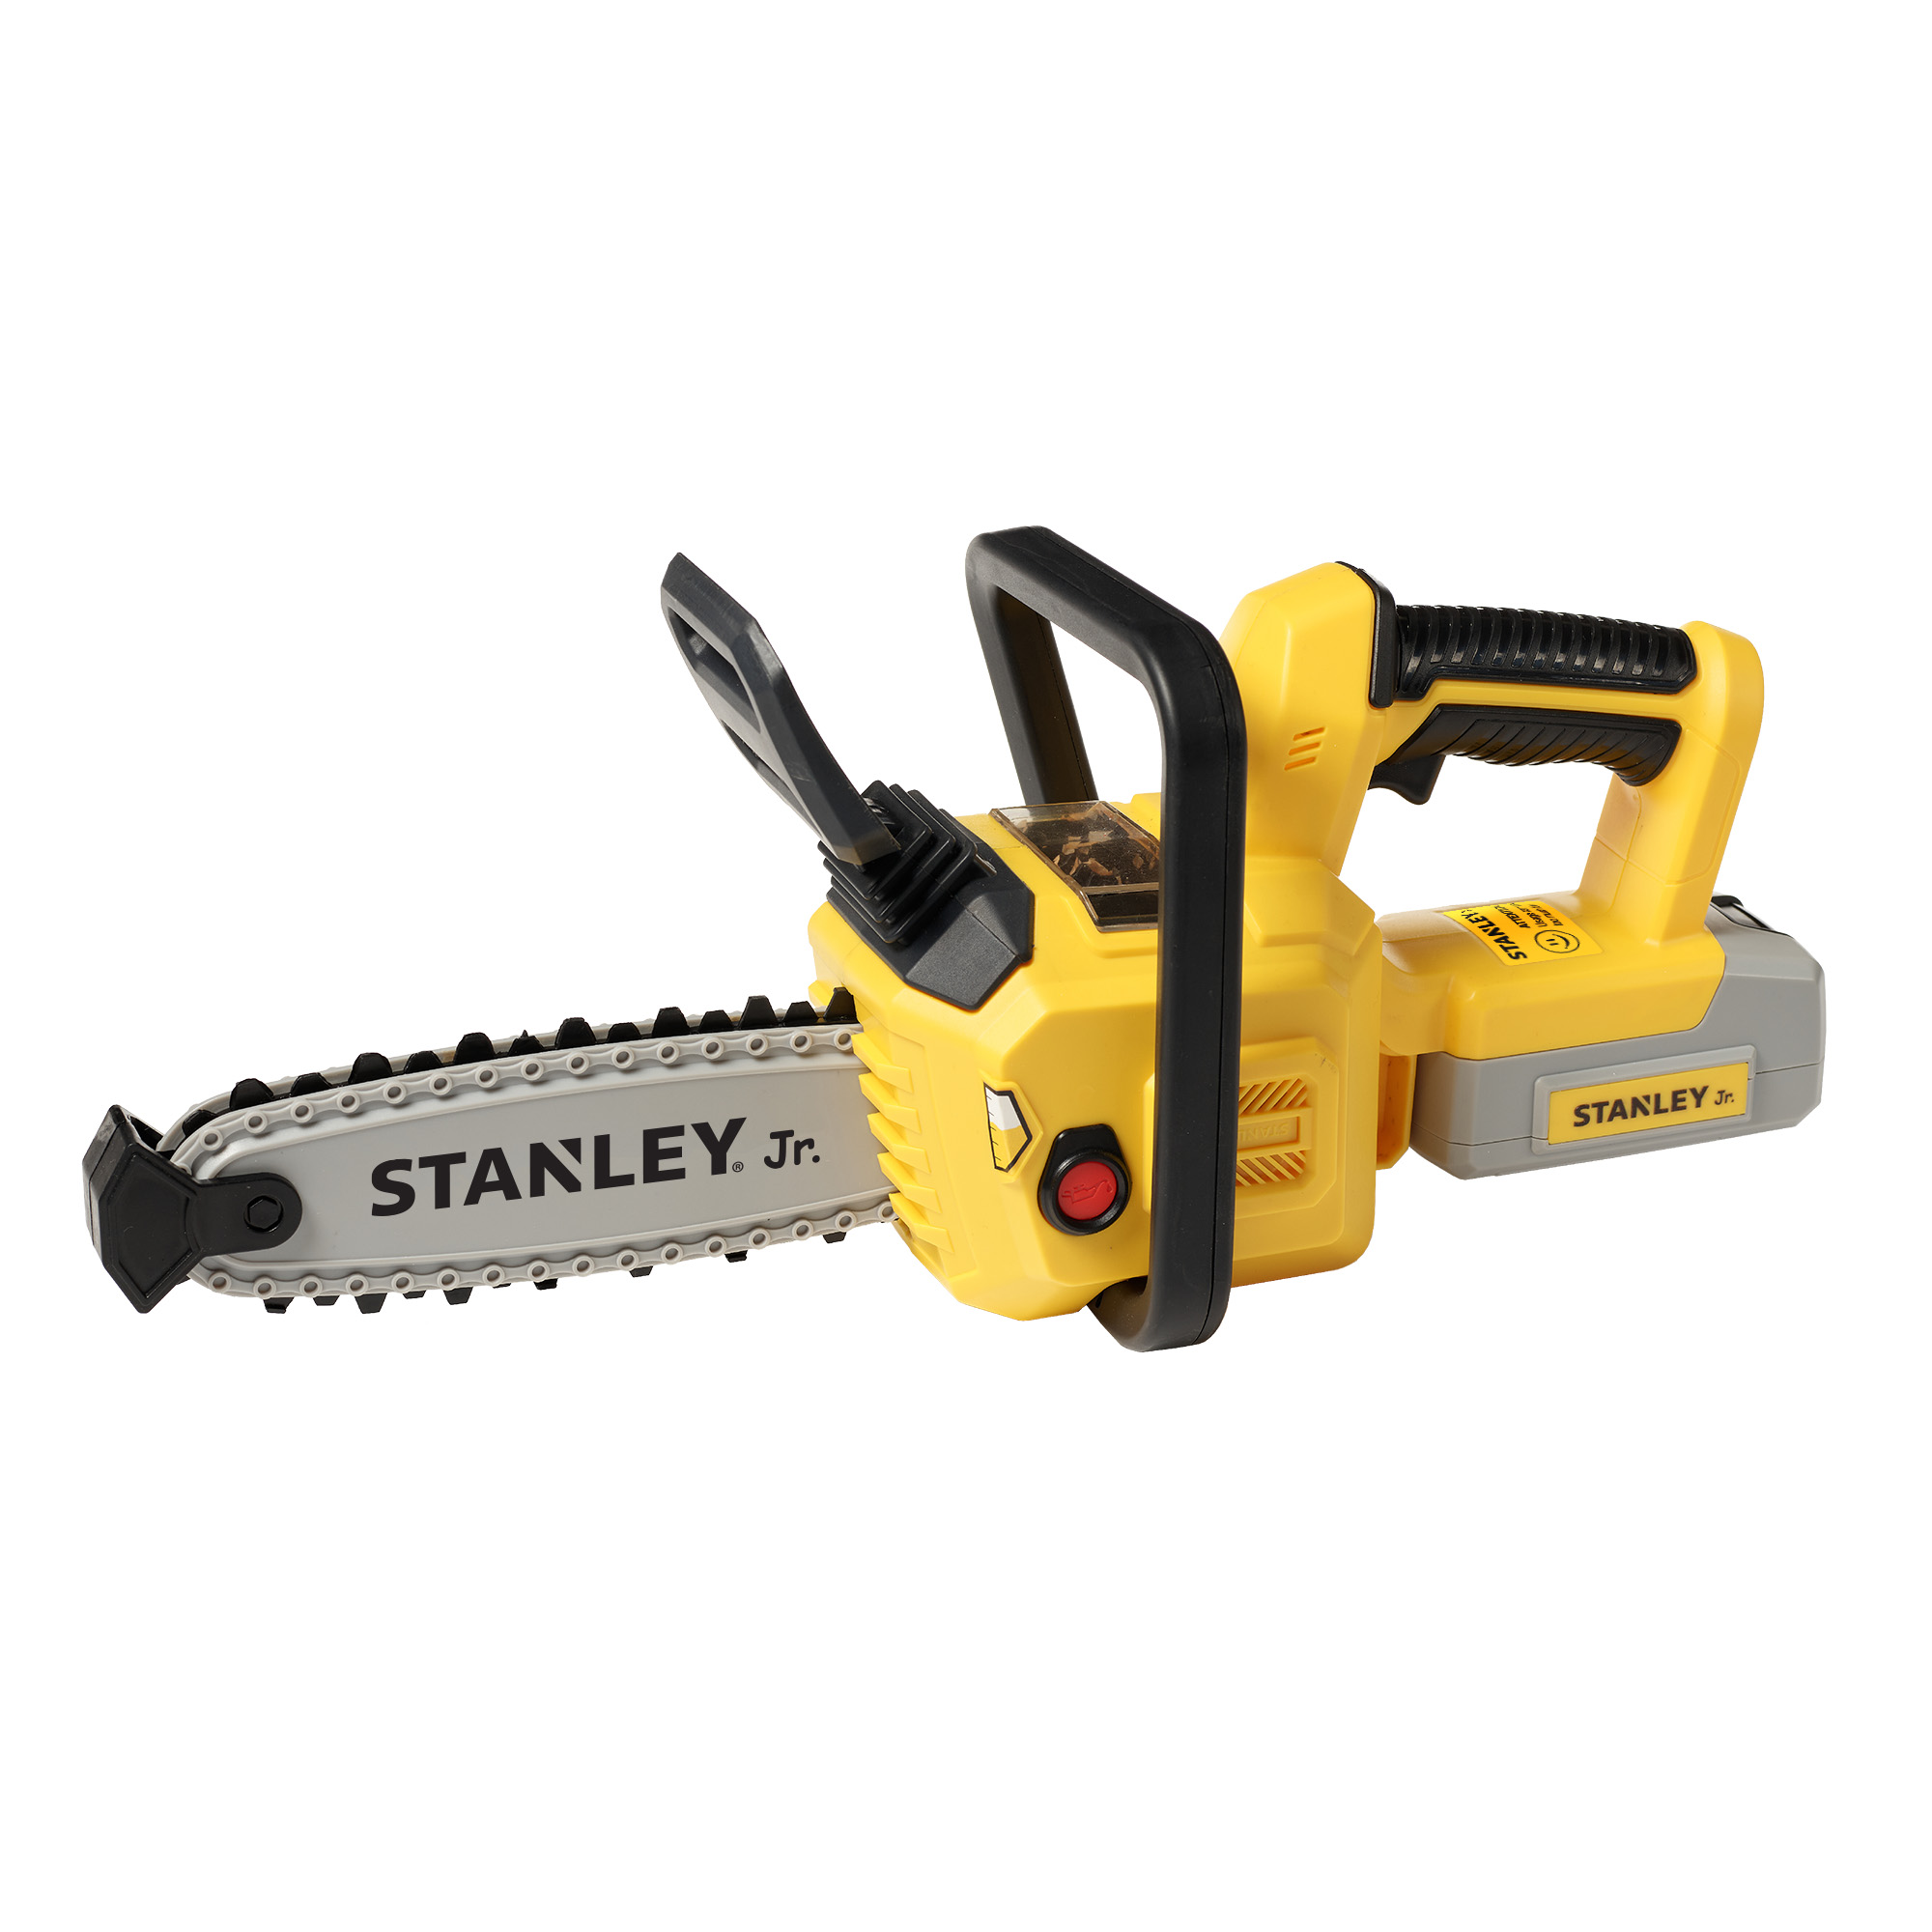 Stanley Jr. Battery Operated Toy Jigsaw